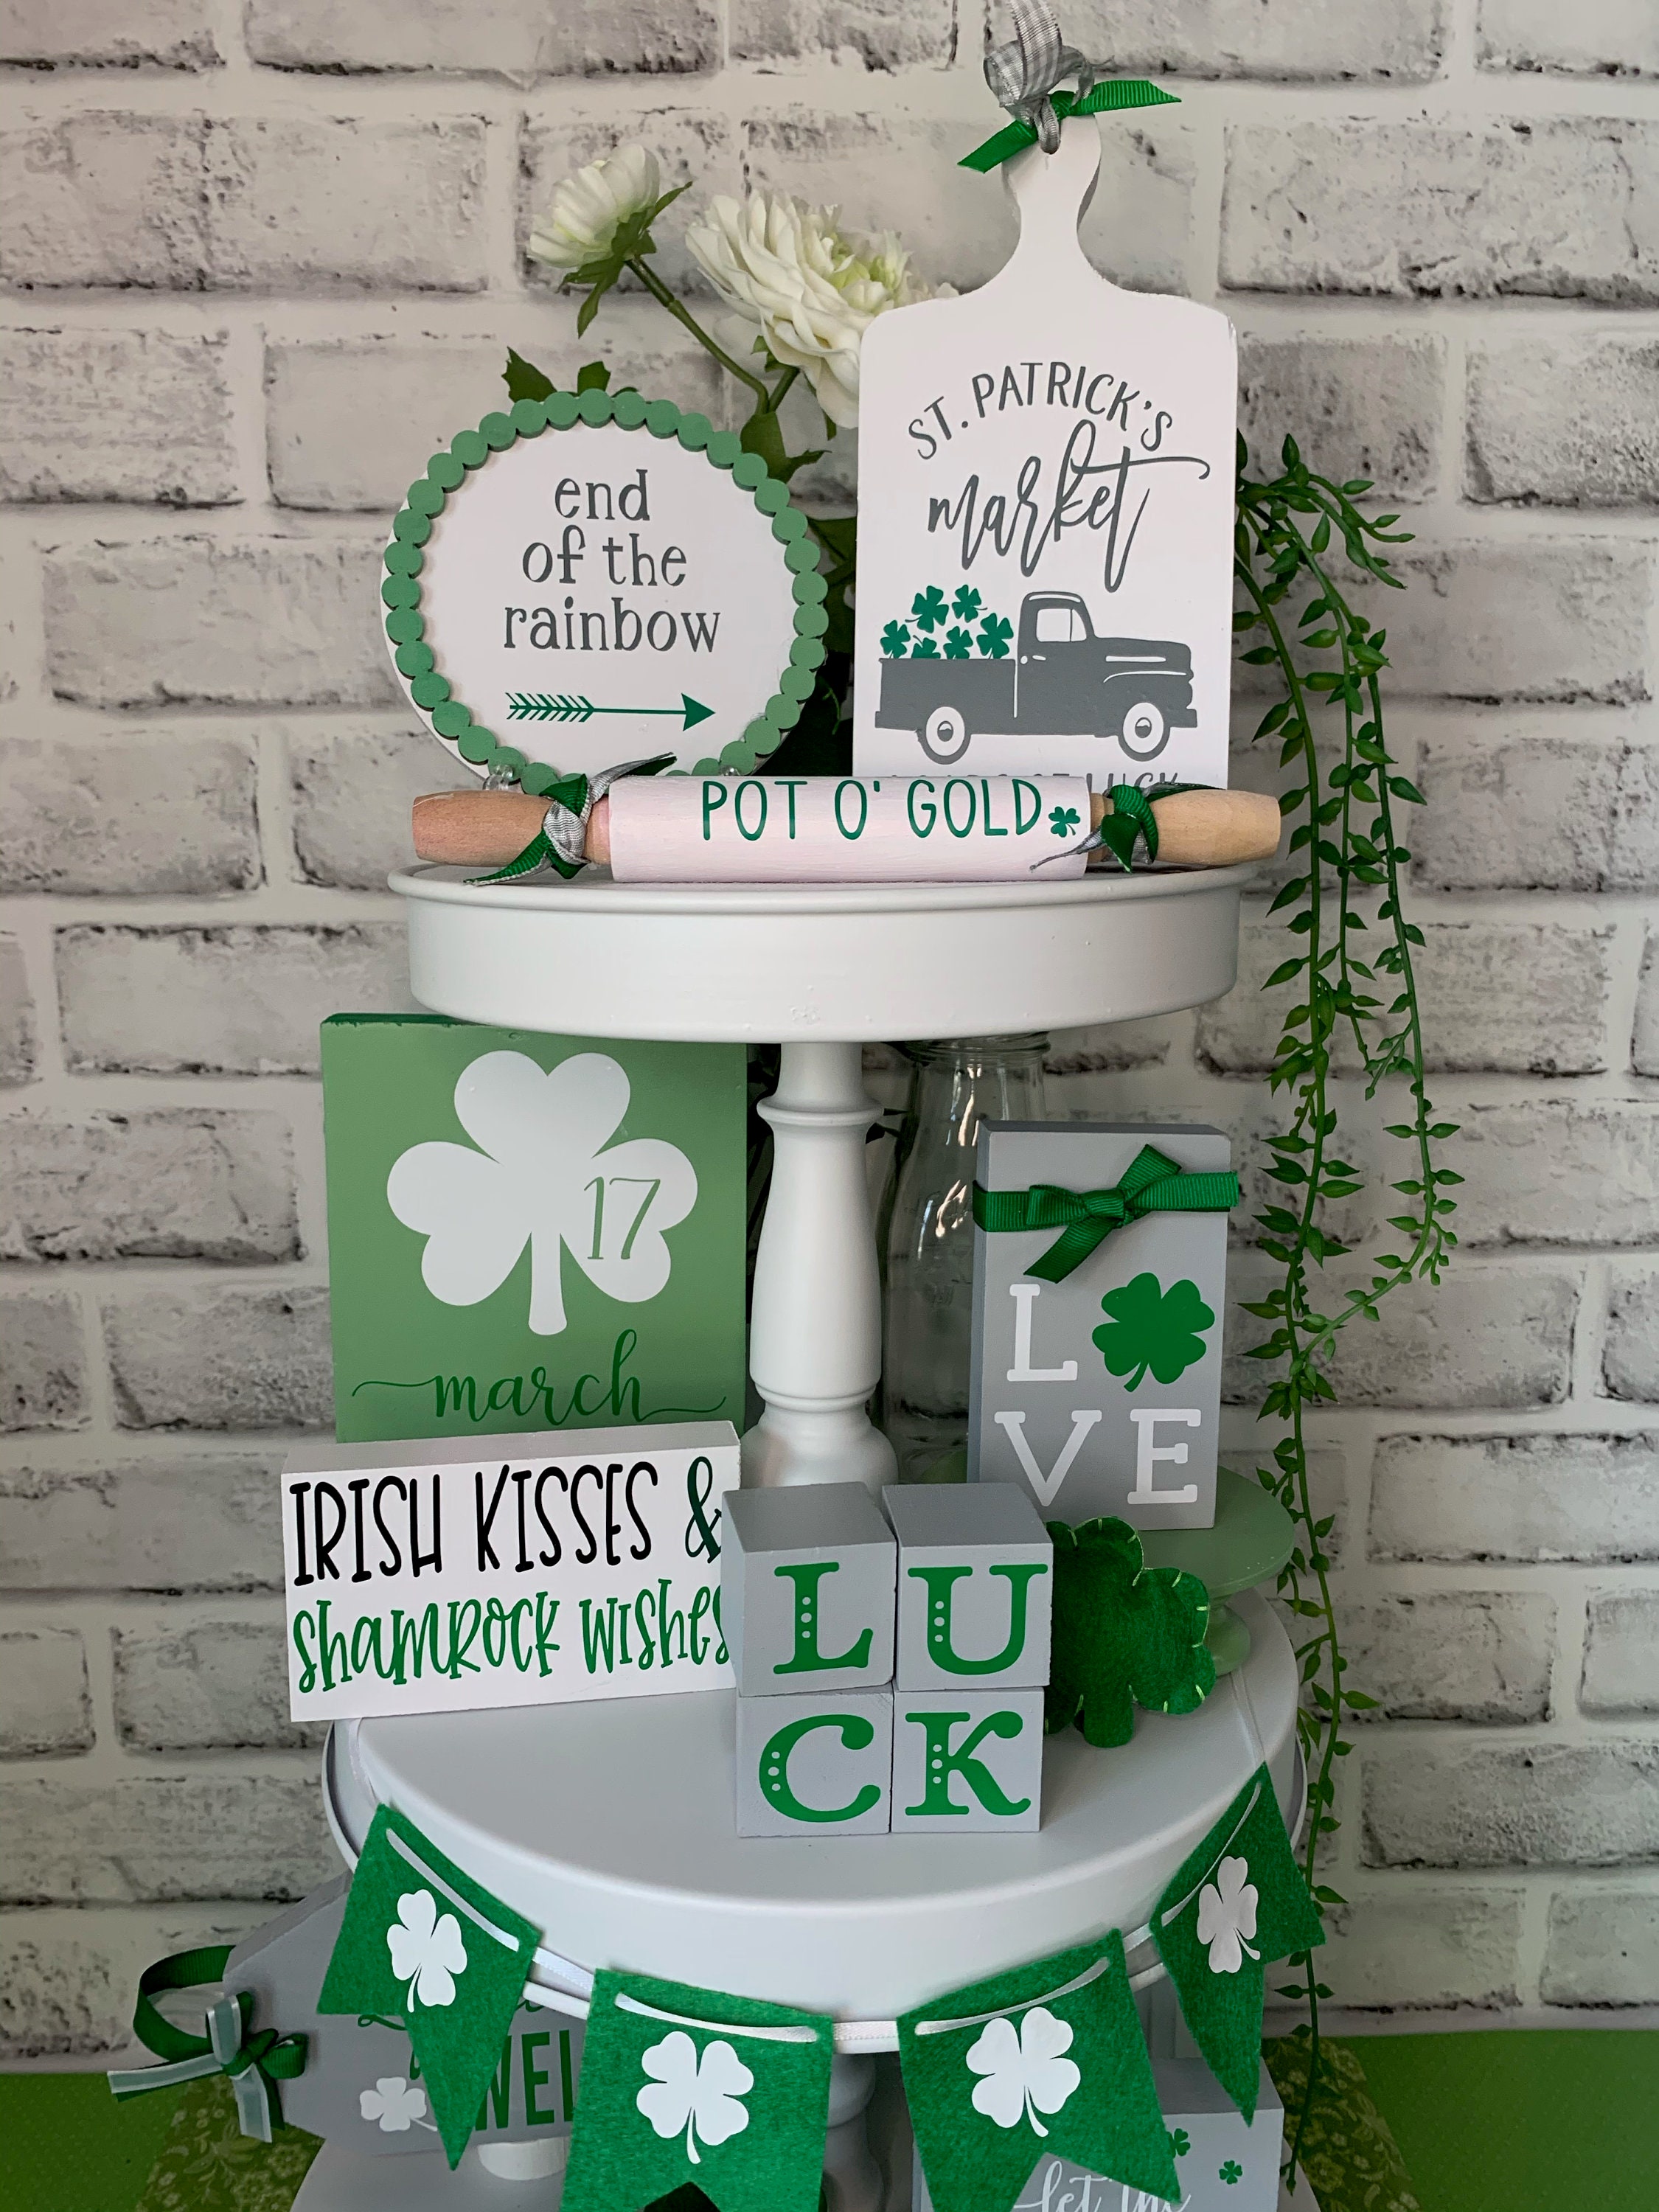 St Patricks Day Card, Shamrock Cards, Mini Note Cards With Envelopes, Gift  Enclosure Cards, Blank Note Cards, Mini Cards, Small Note Cards 